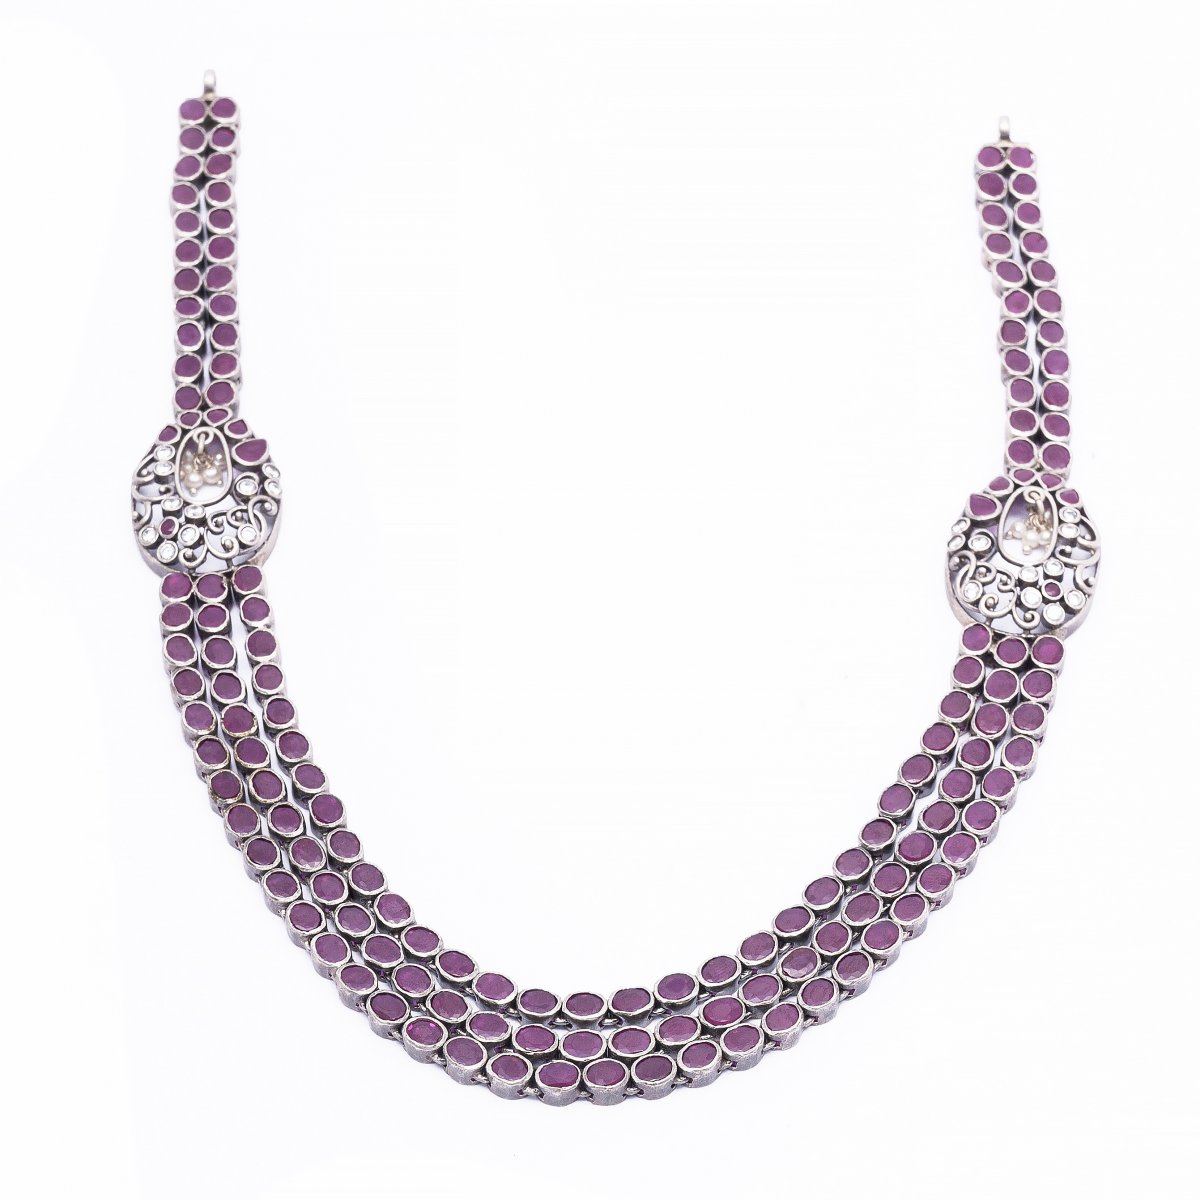 92.5 OXIDISED SILVER SPINAL TRADITIONAL PARTY NECKLACE FOR GIRLS 